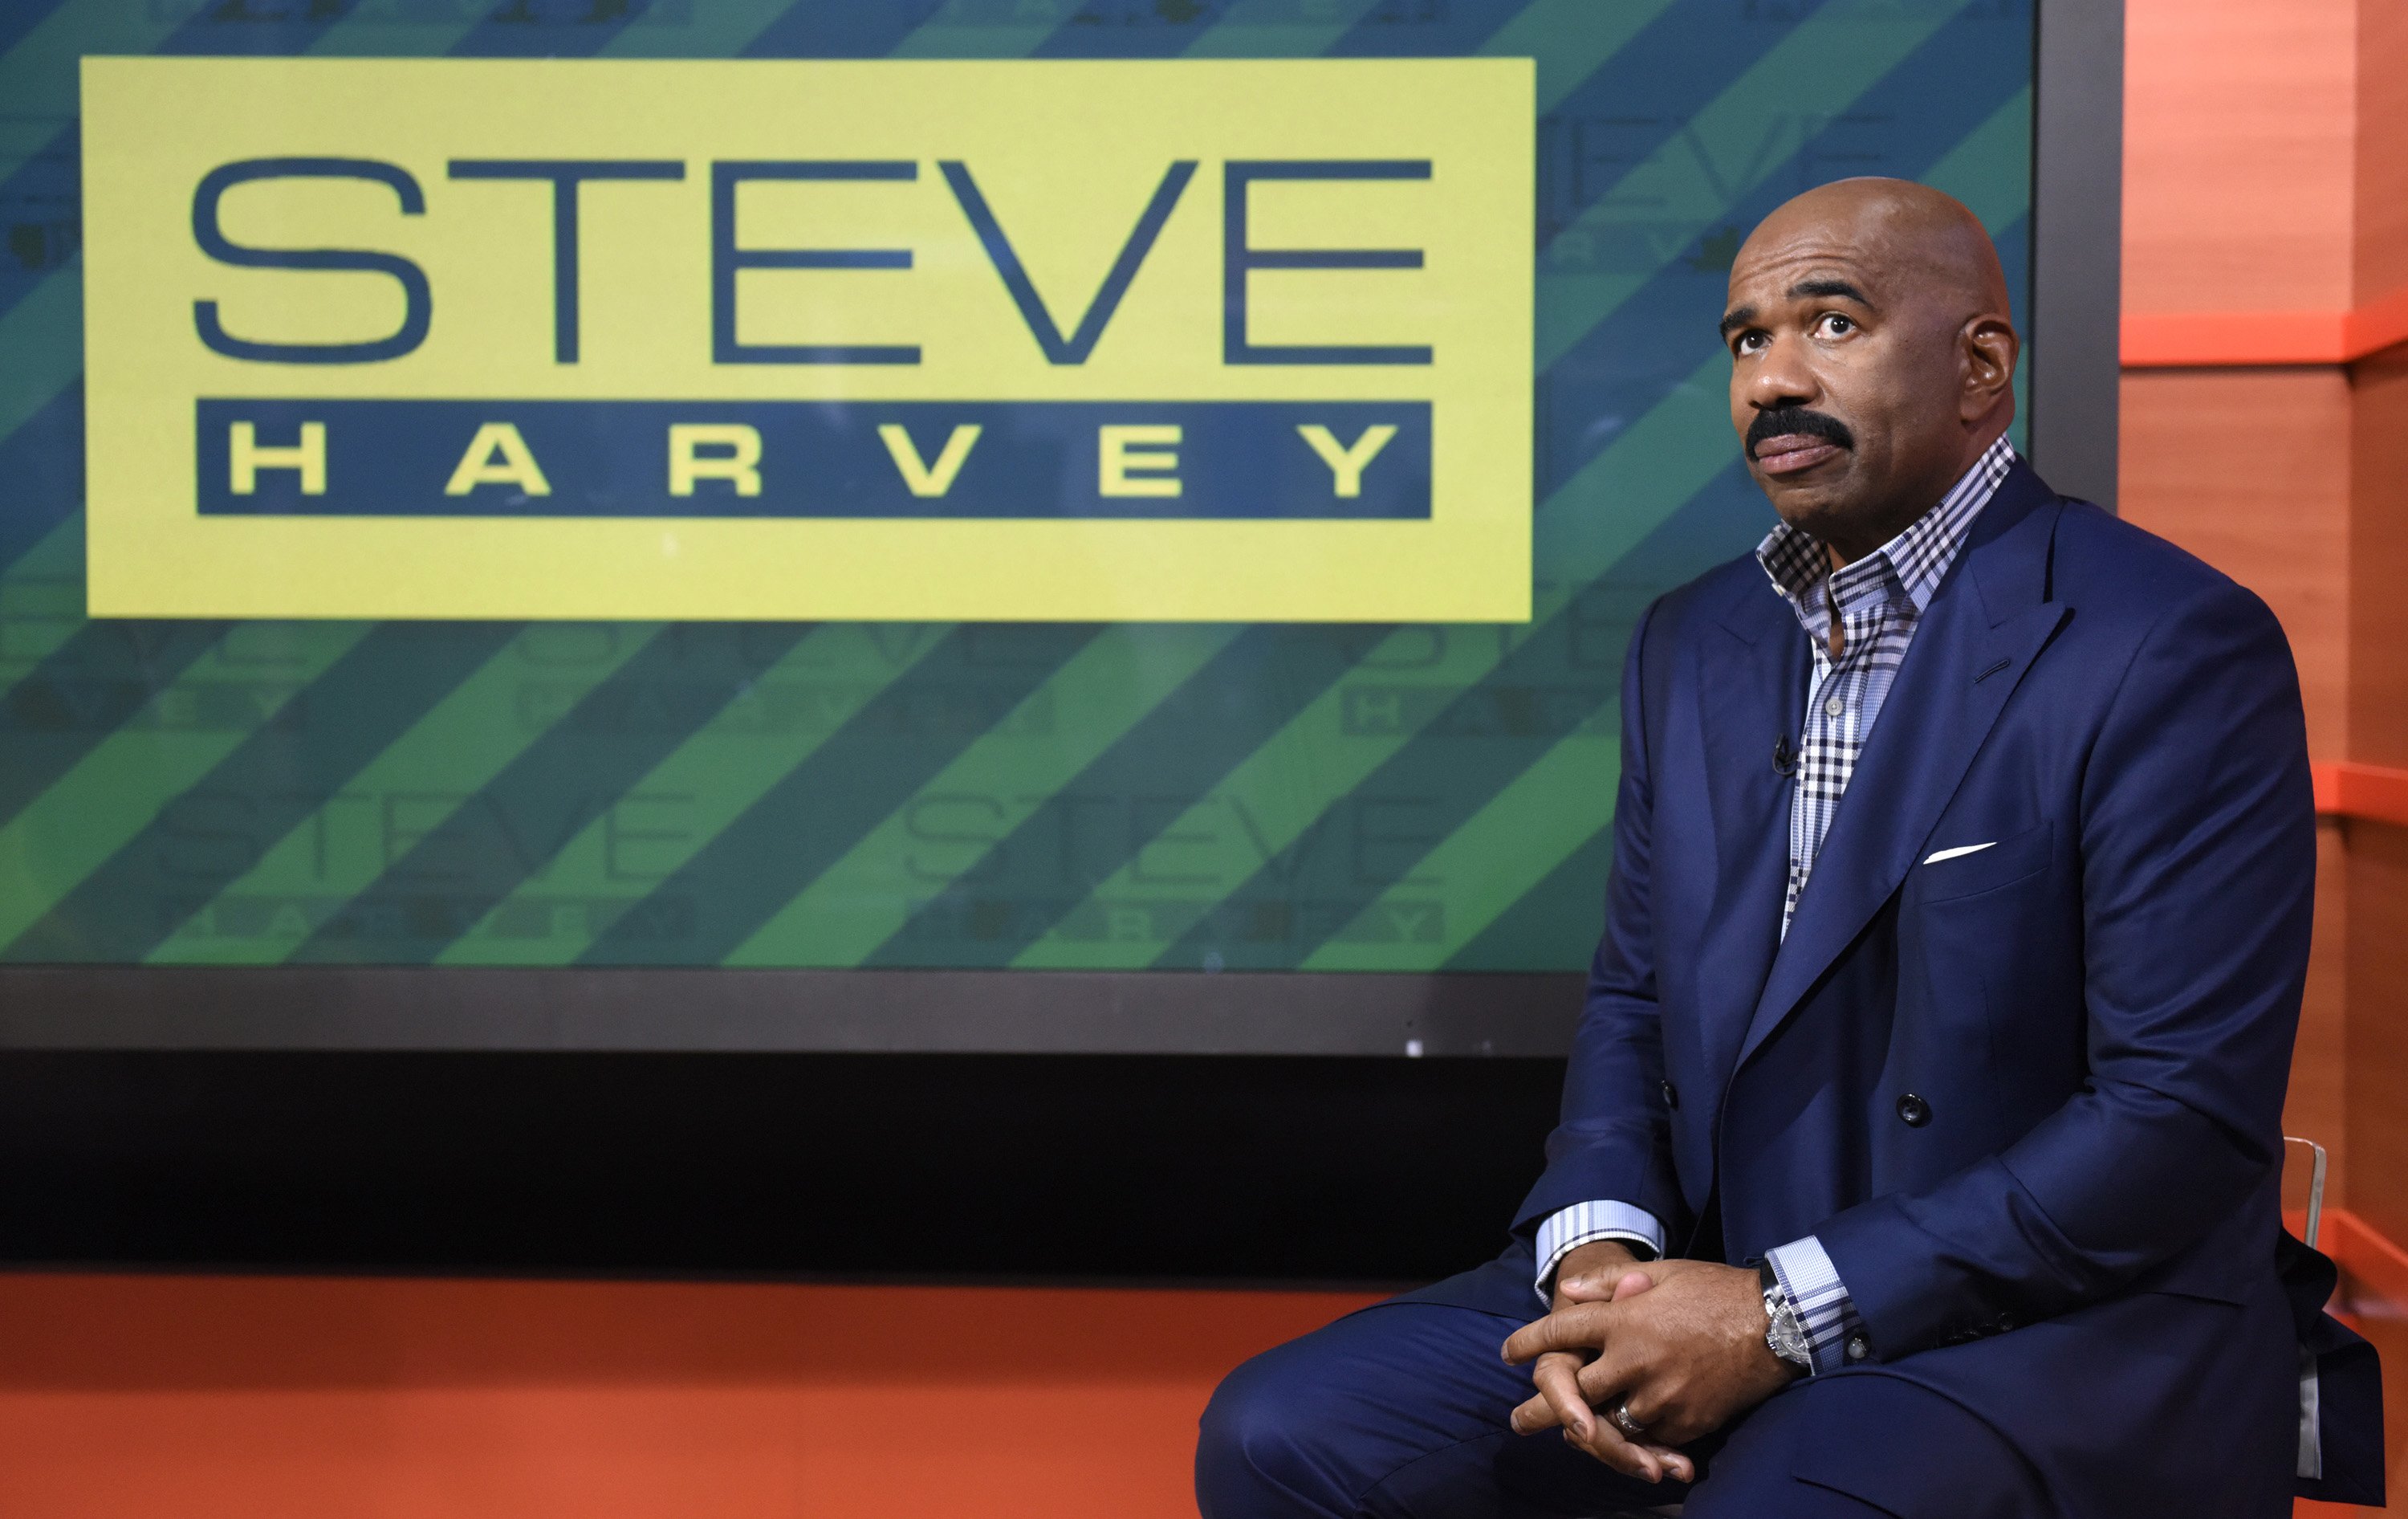 TV and radio host Steve Harvey during an appearance on the "Today" show on September 4, 2015 ┃Source: Getty Images